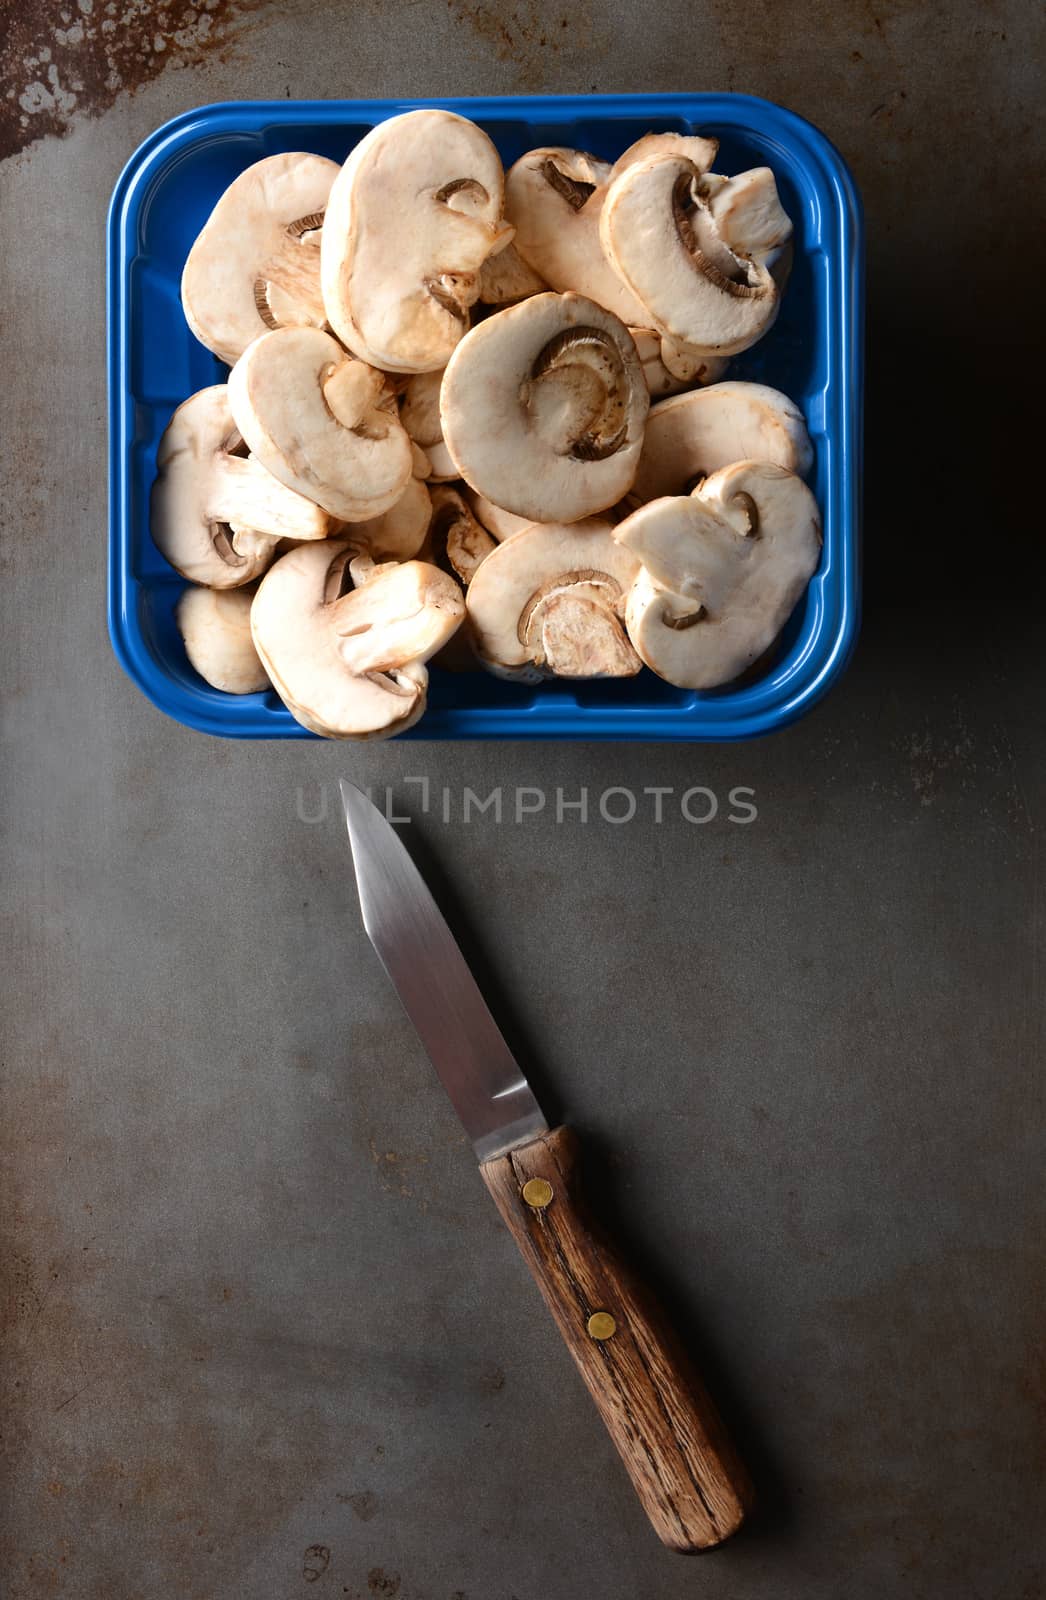 A blue container of sliced mushrooms on a metal baking sheet with a knife. Overhead shot in vertical format.